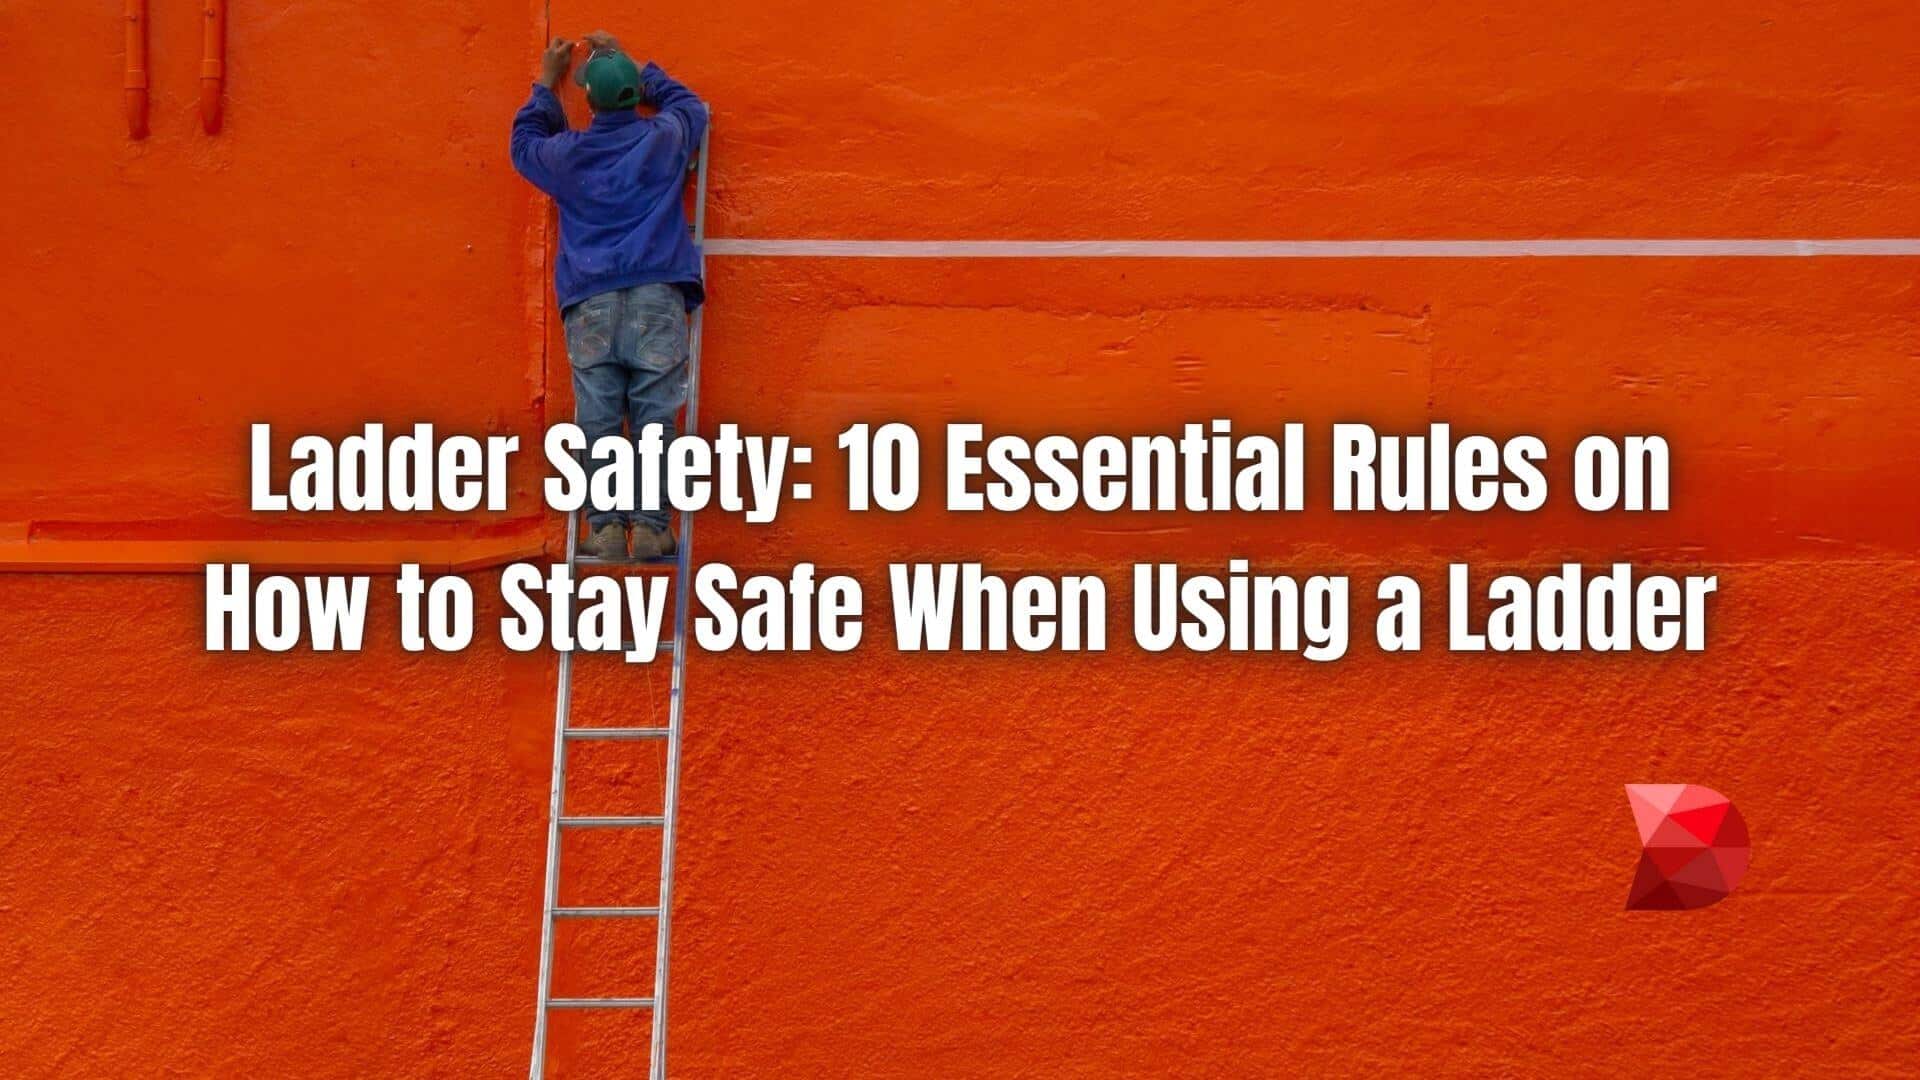 Stay safe on ladders with our full guide. Click here to explore 10 essential rules for ladder safety and ensure a secure working environment.